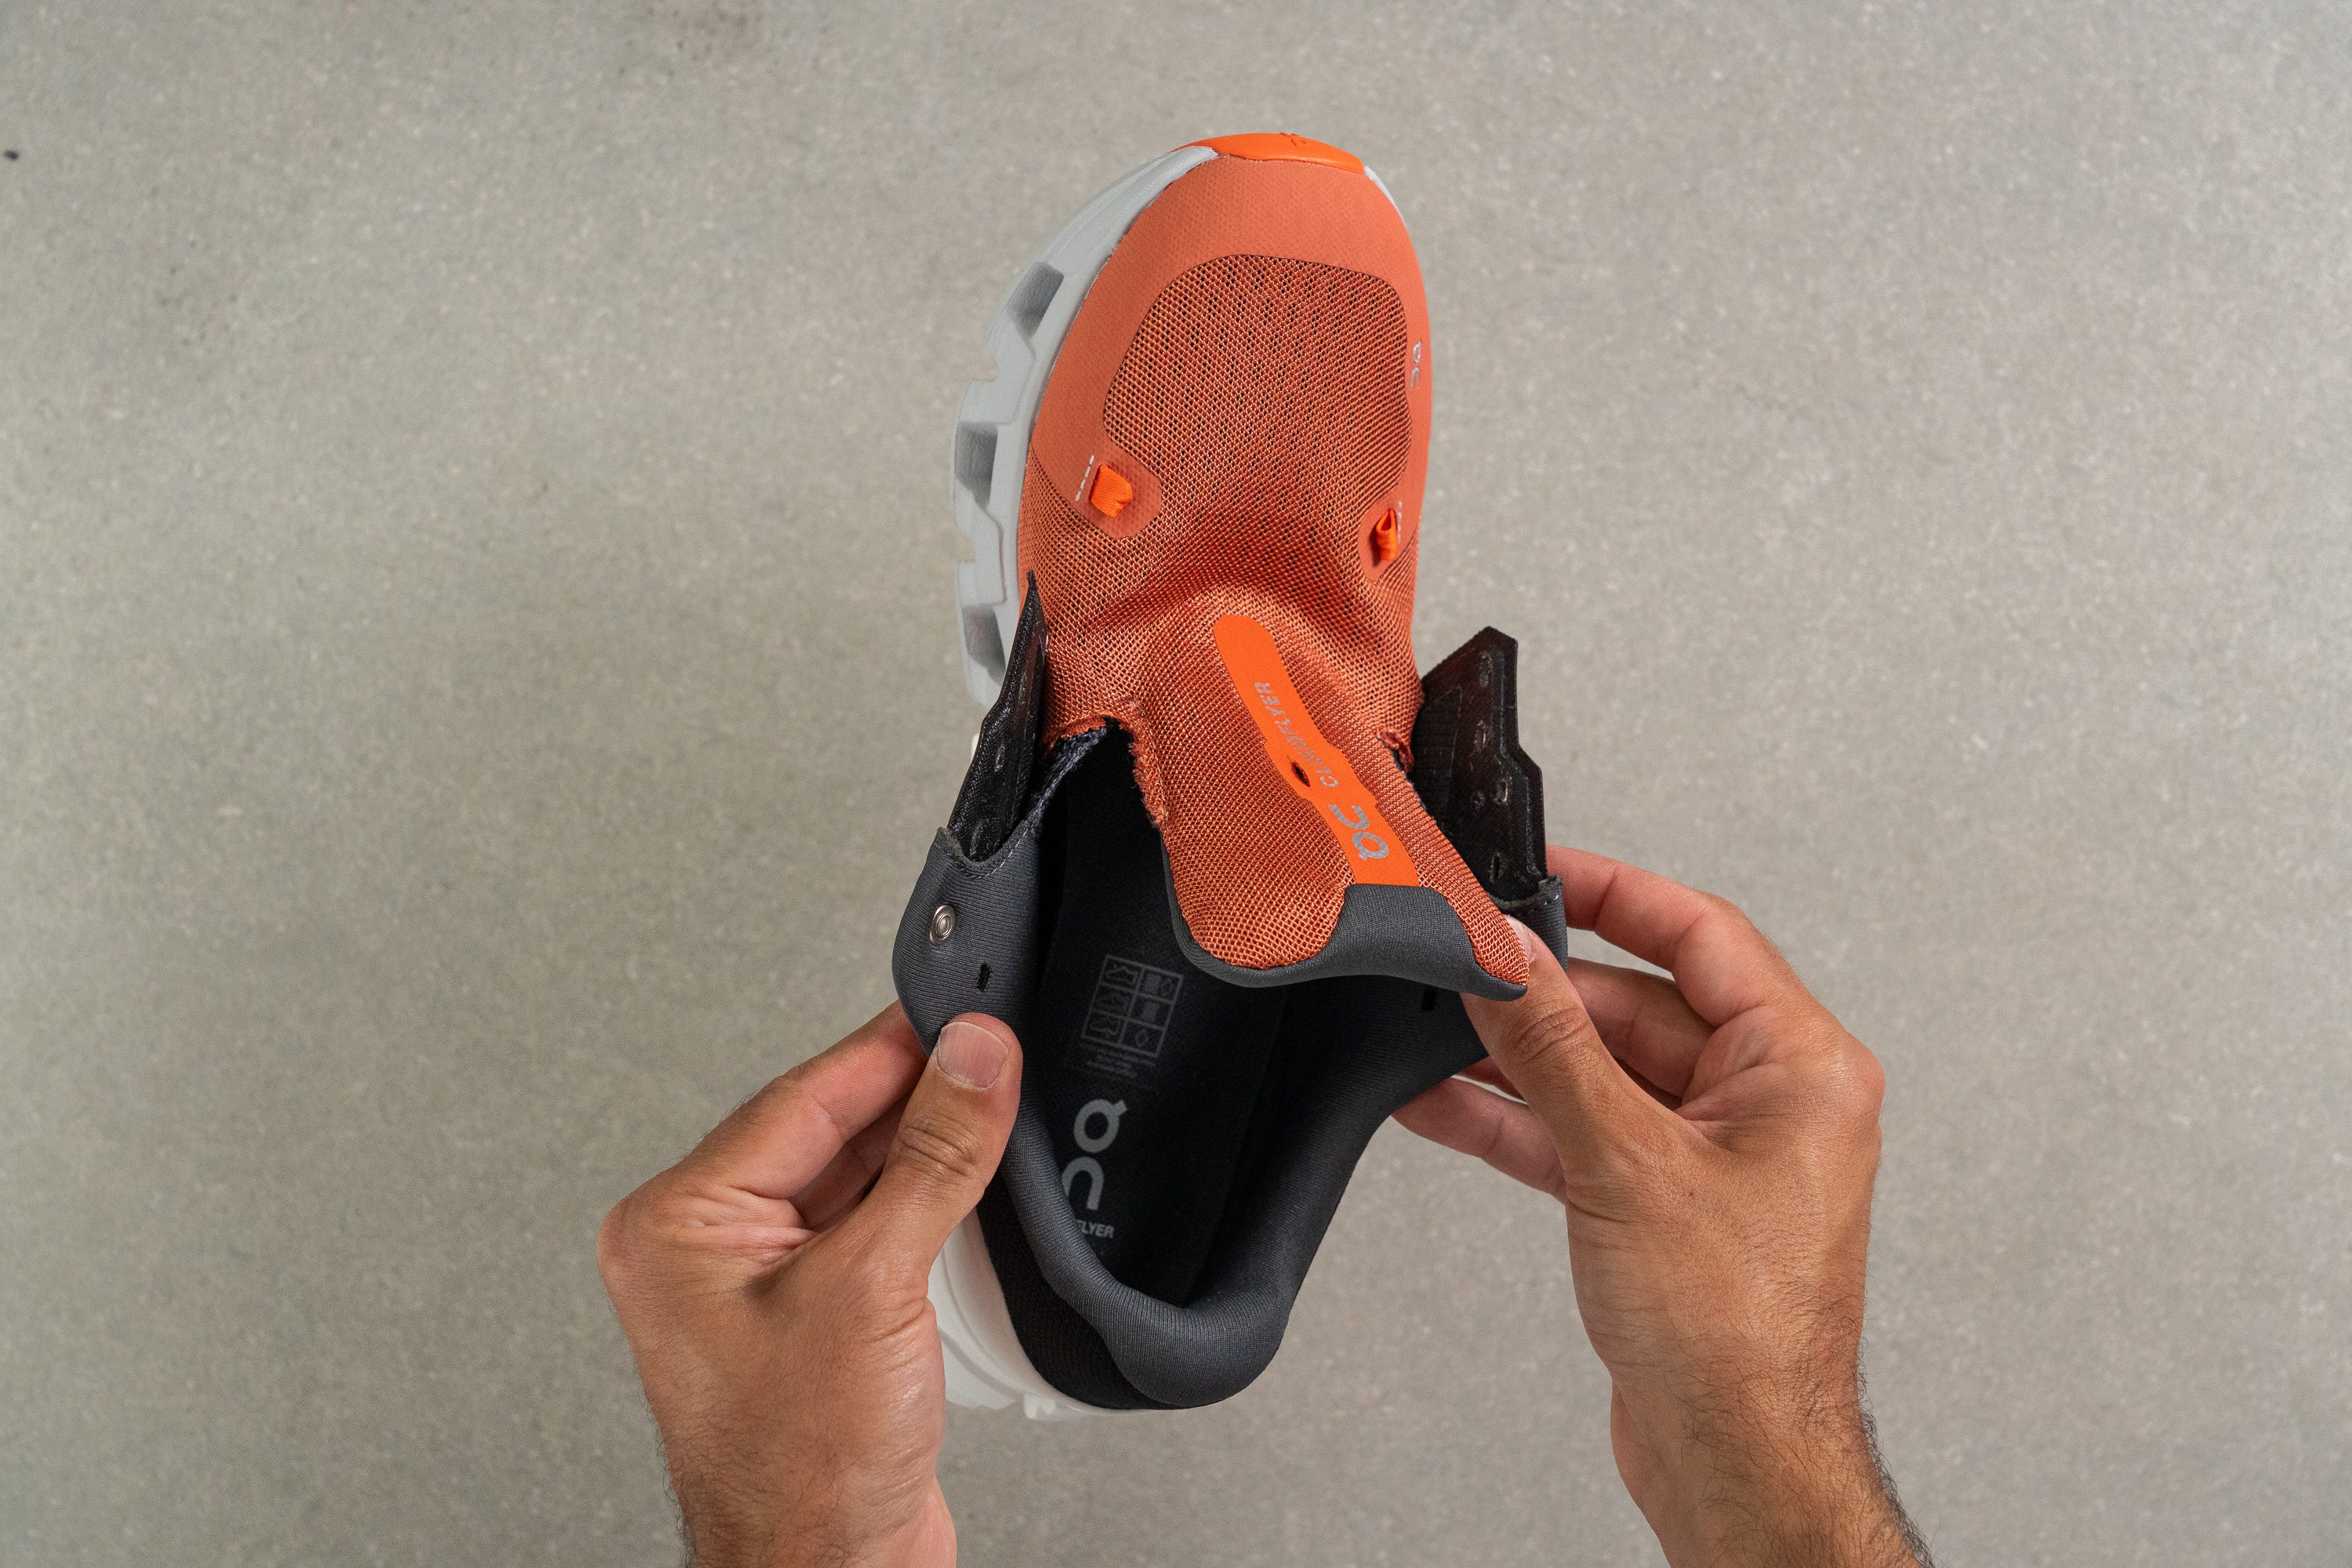 held up, we thought this shoe would be great for solid durability Tongue: gusset type